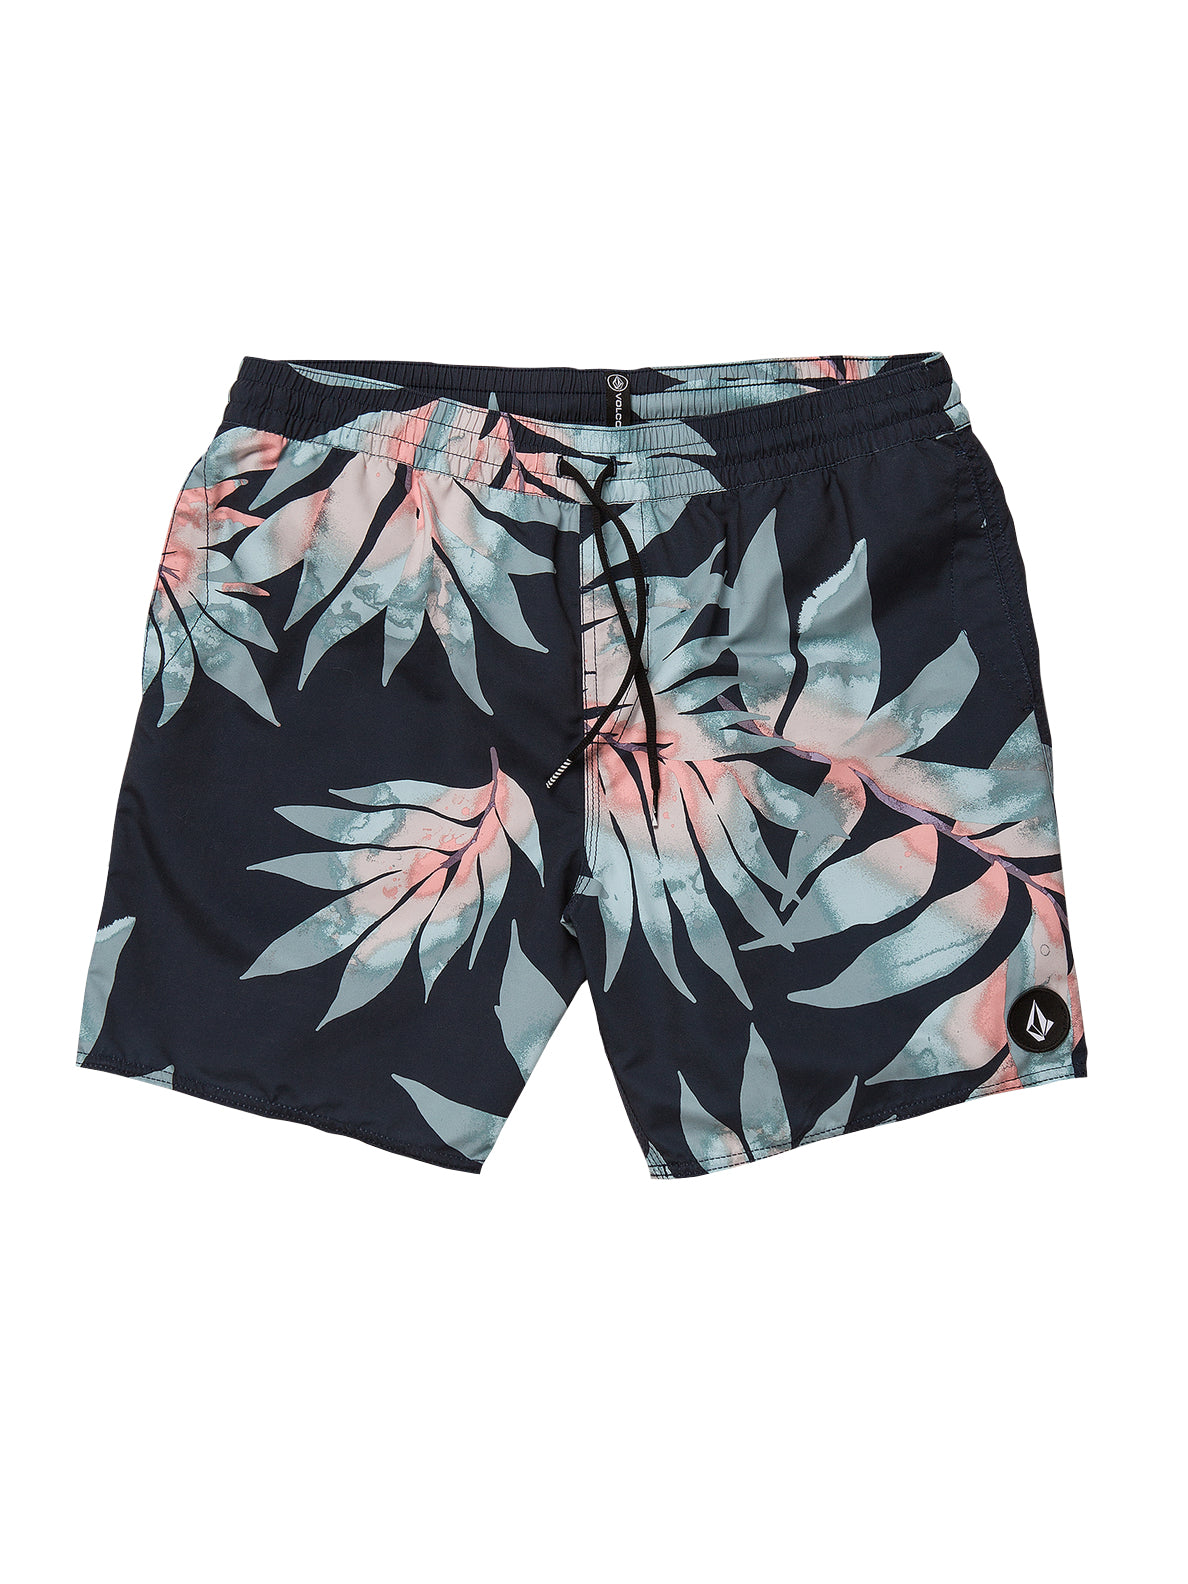 VOLCOM POLLY PACK TRUNK 17 NVY M